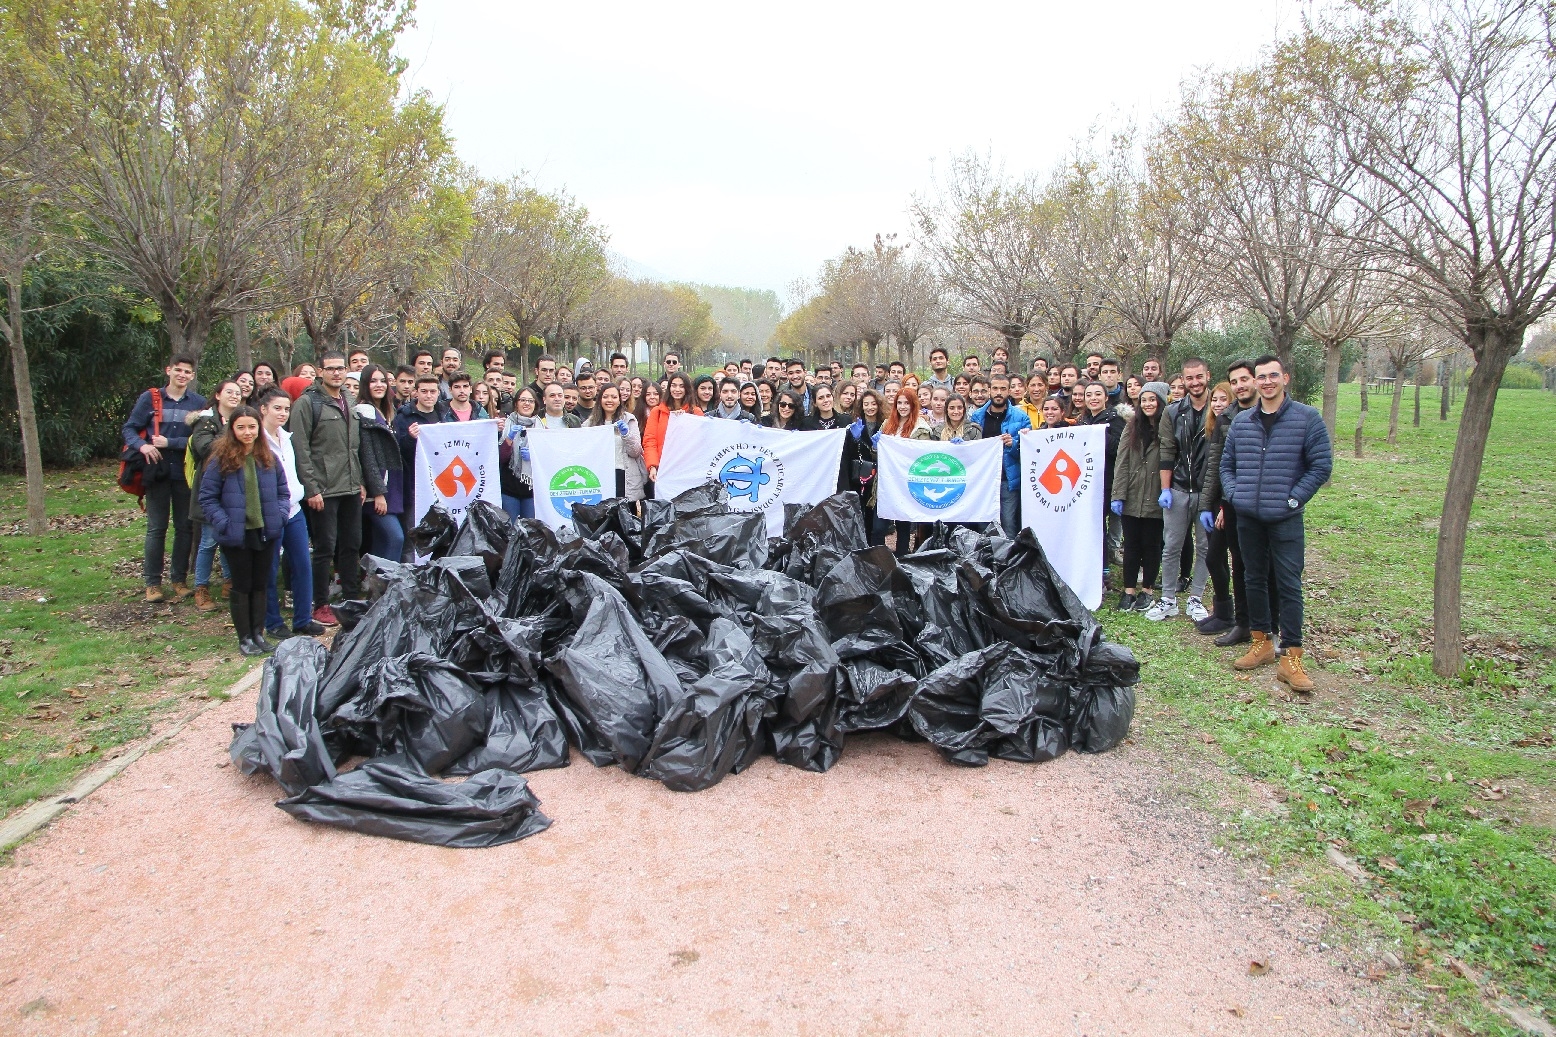 300 KILOS OF GARBAGE COLLECTED BY IUE STUDENTS IN ONE HOUR